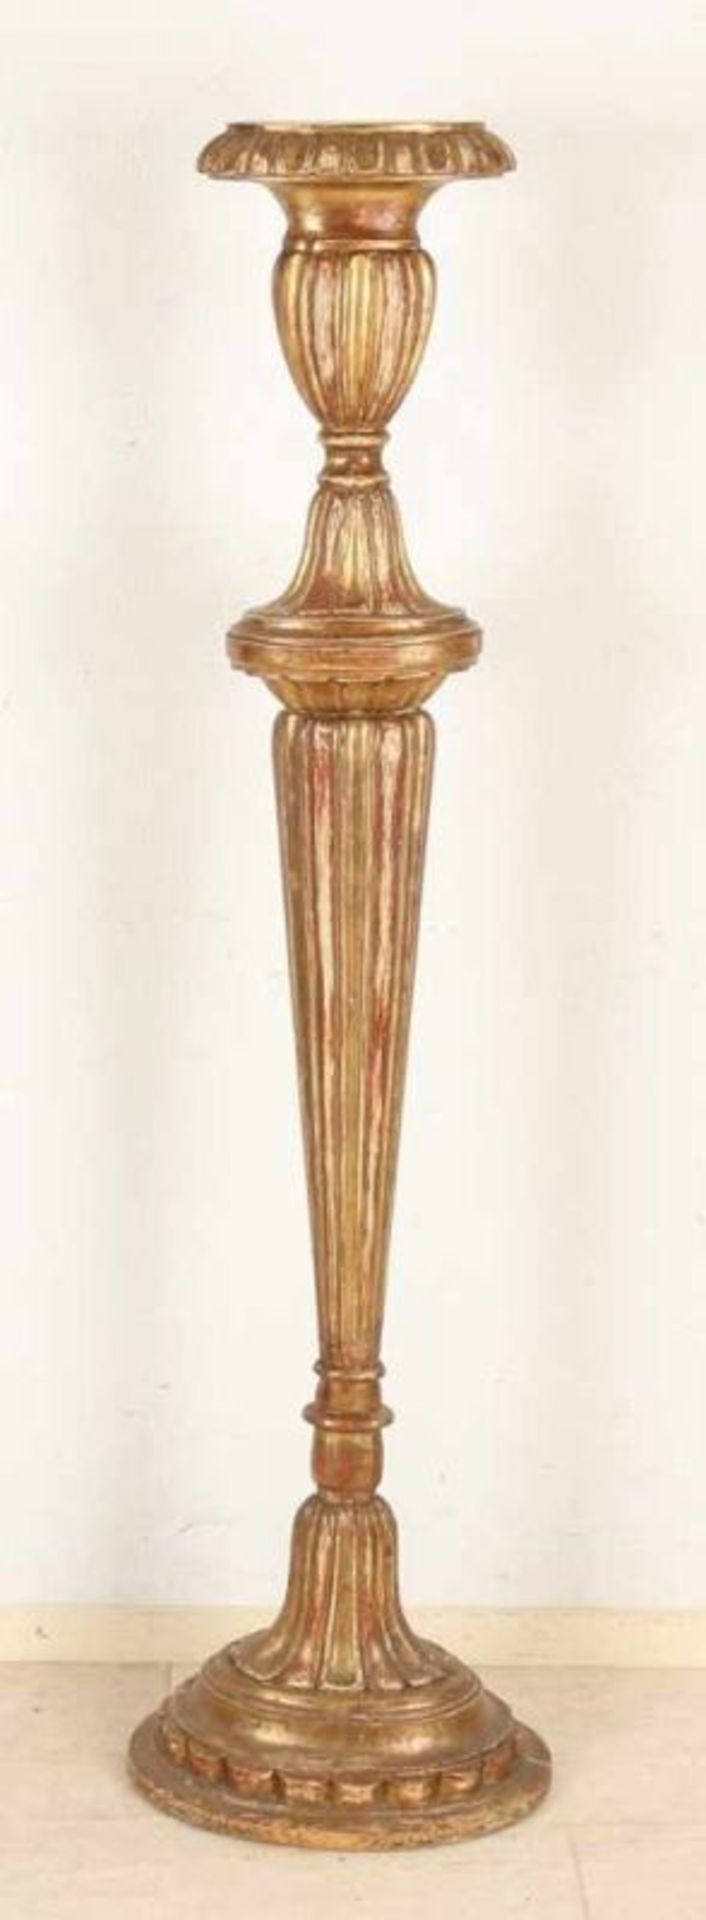 19th Century gilded wooden pedestal in Louis XVI style. Size: H 143 cm. In good condition.